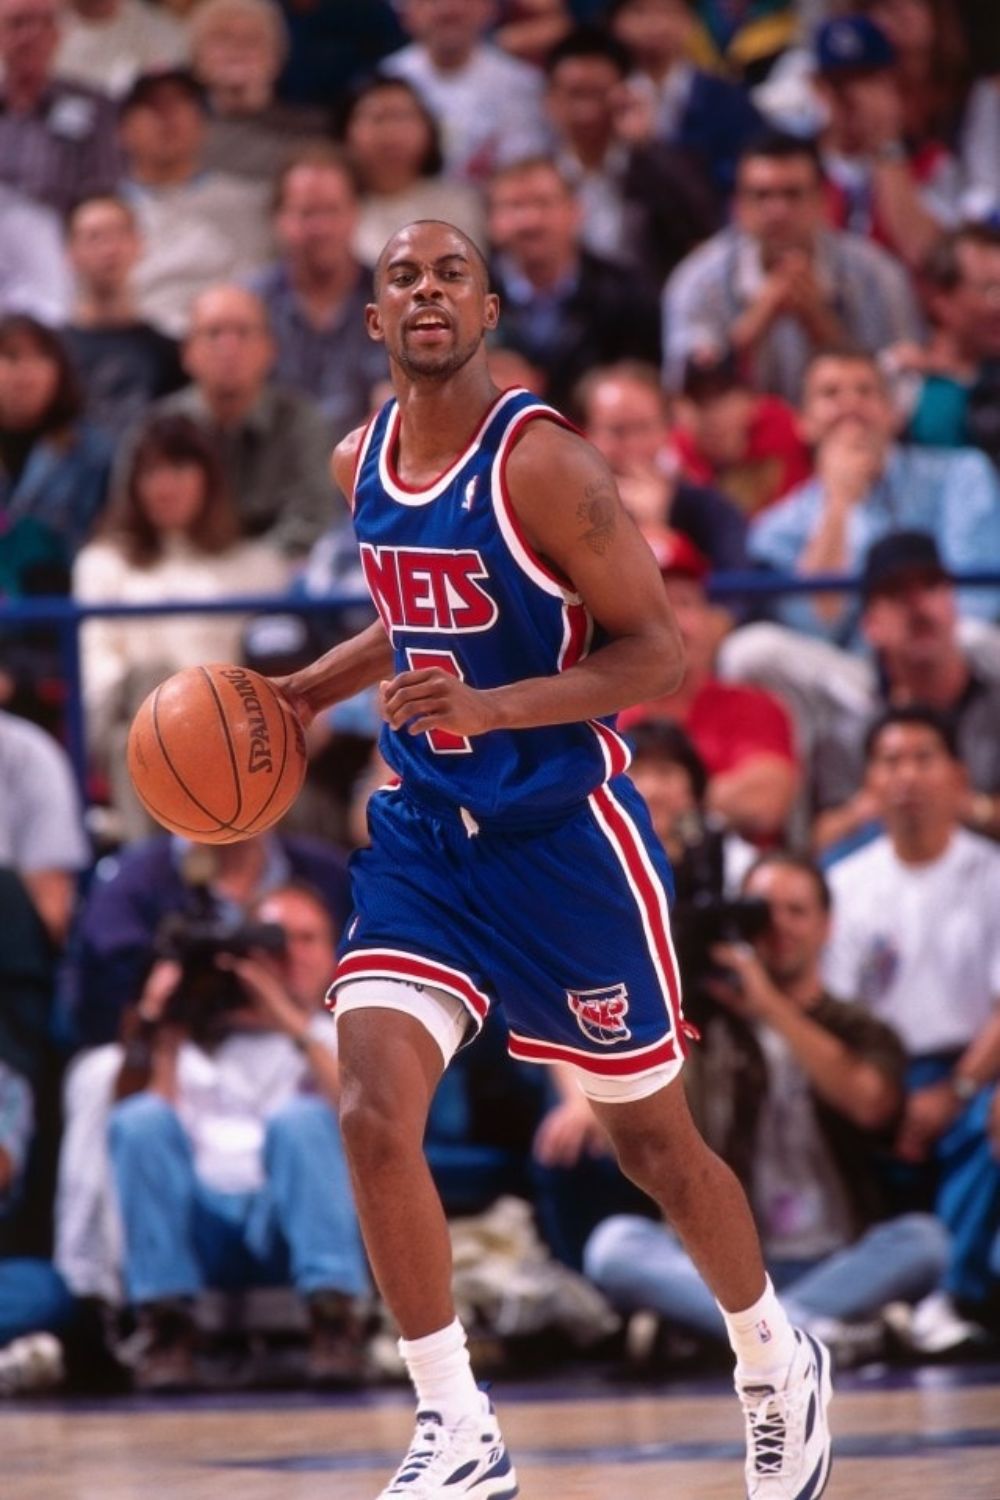 Kenny Anderson Was Selected By The New Jersey Nets In The 1991 NBA Draft